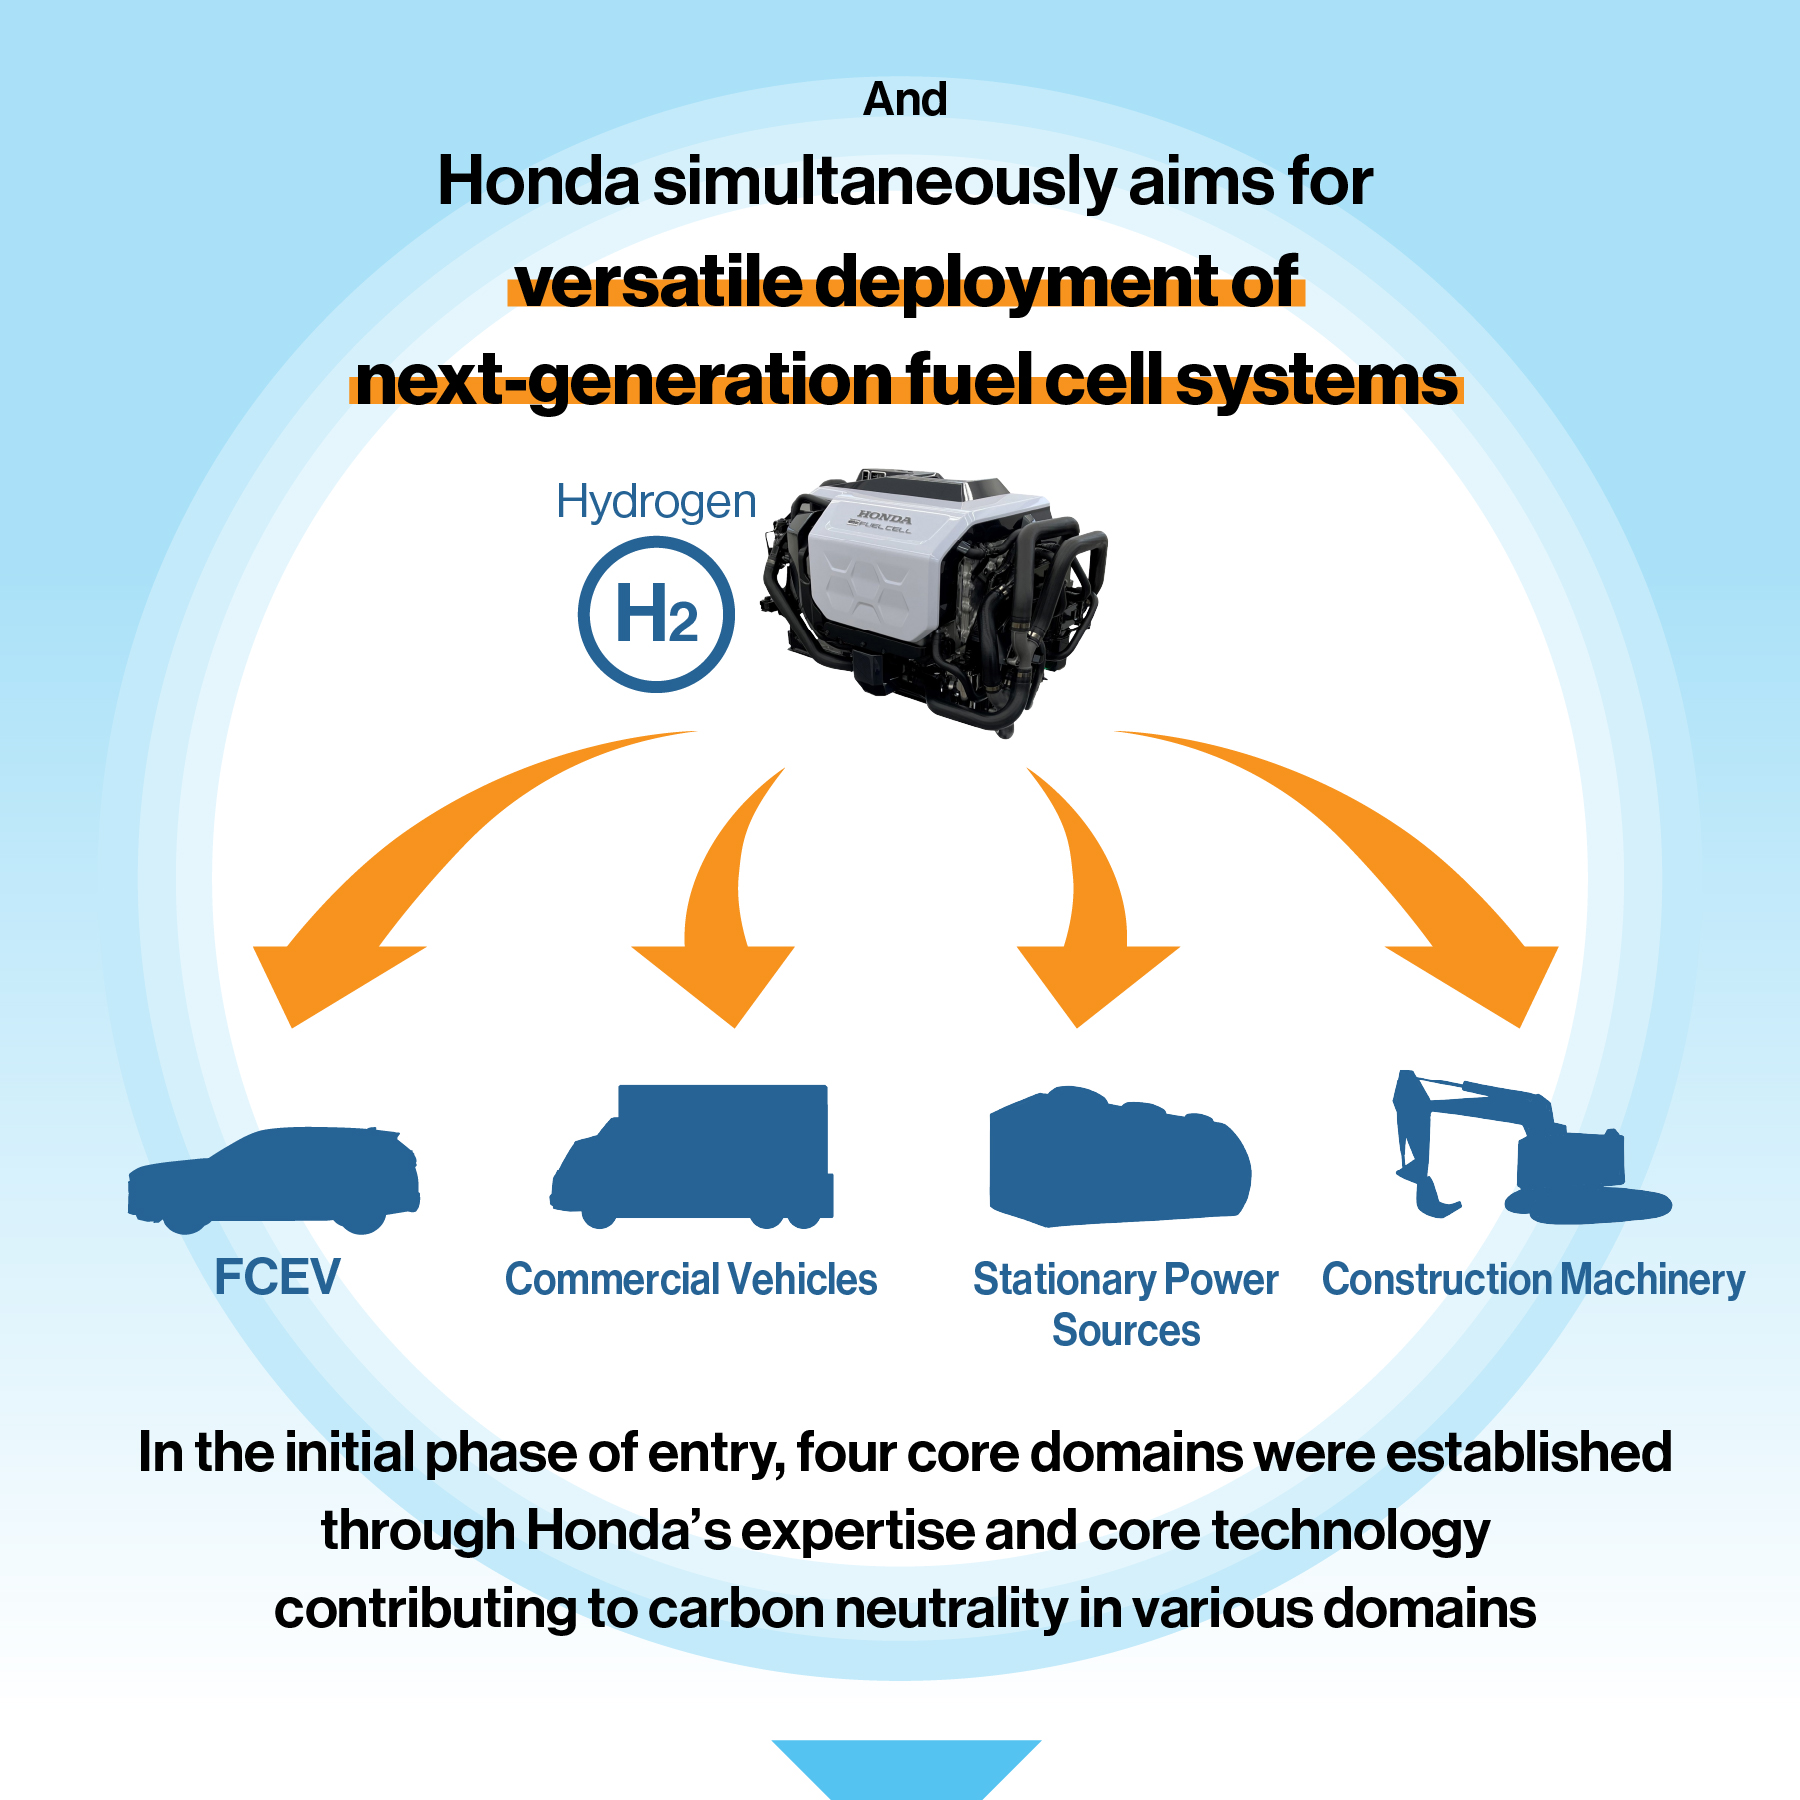 Honda aims for the versatile deployment of next-generation fuel cell systems